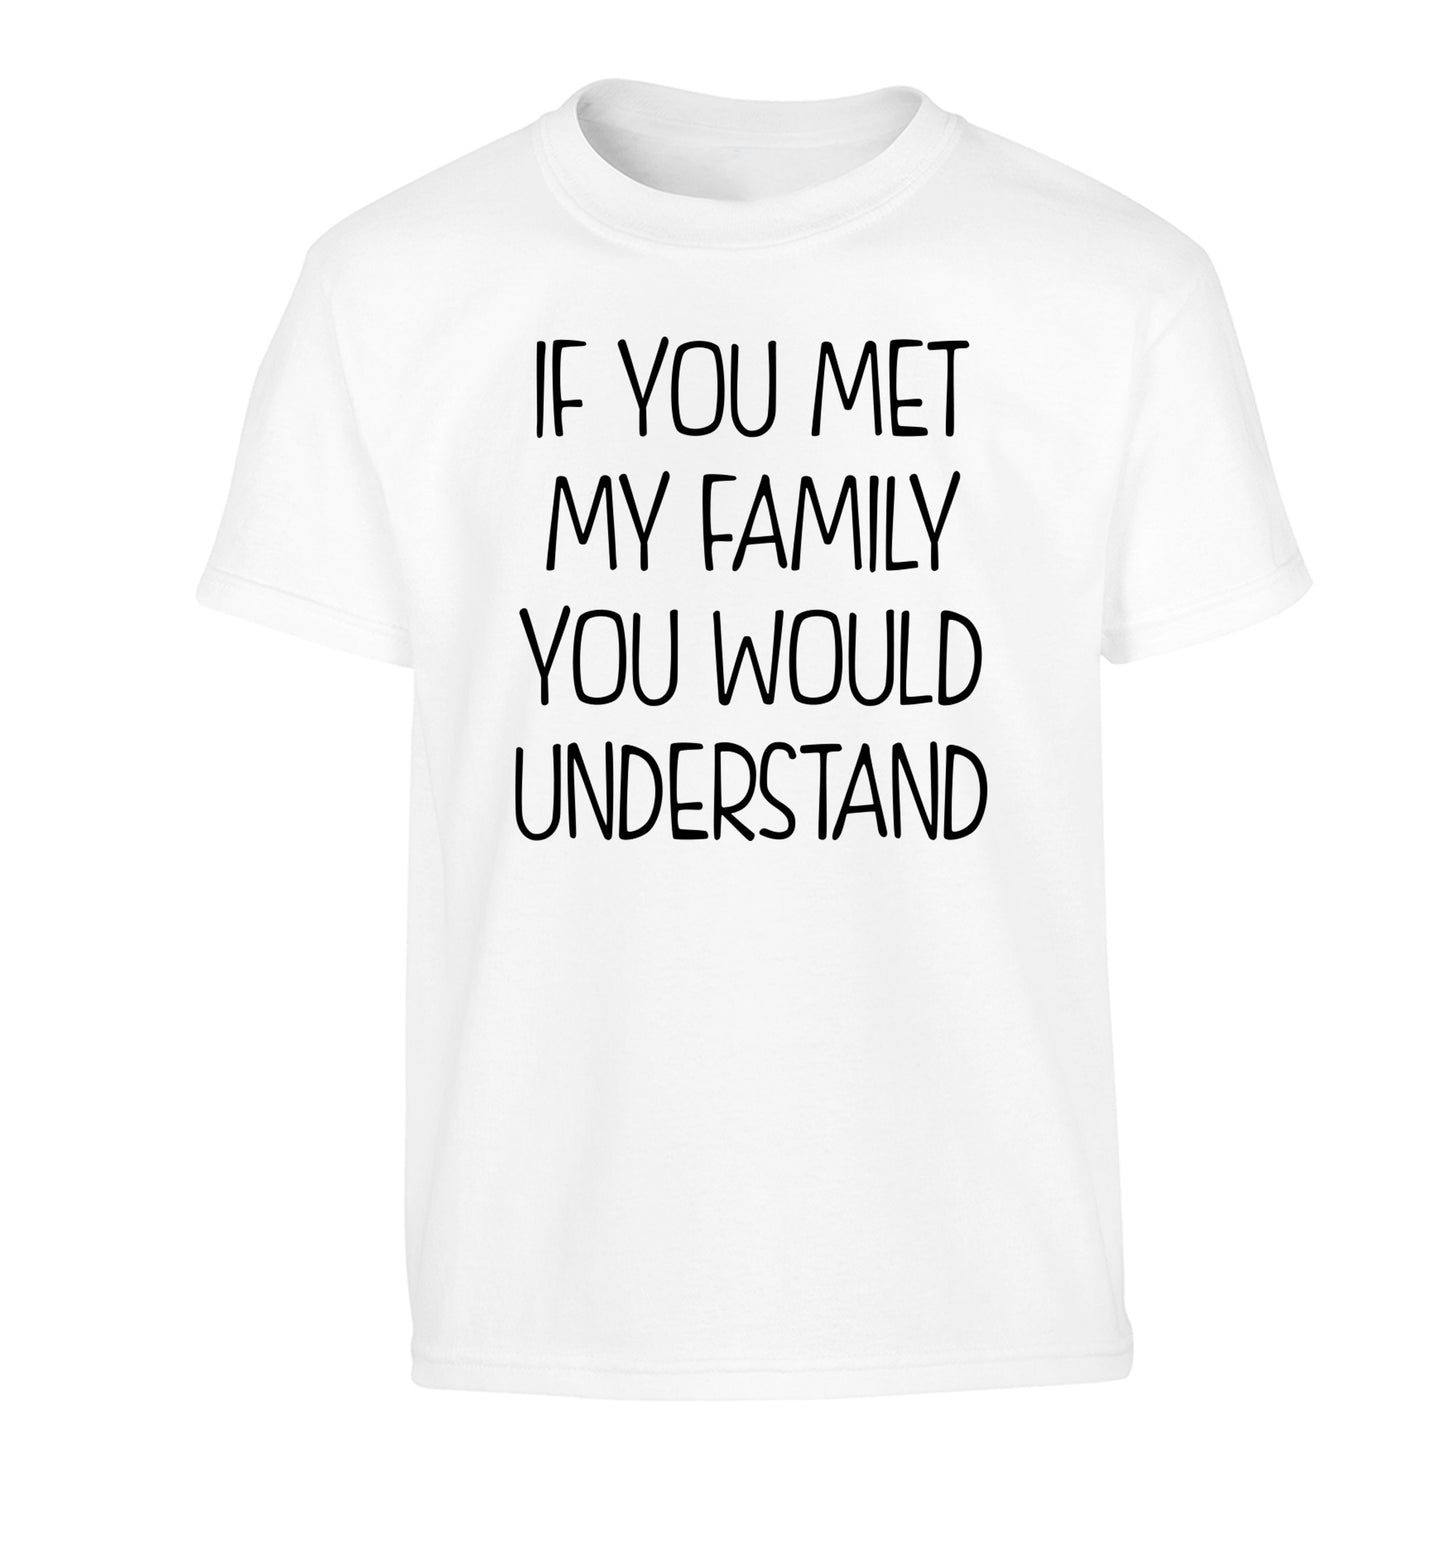 If you met my family you would understand Children's white Tshirt 12-13 Years